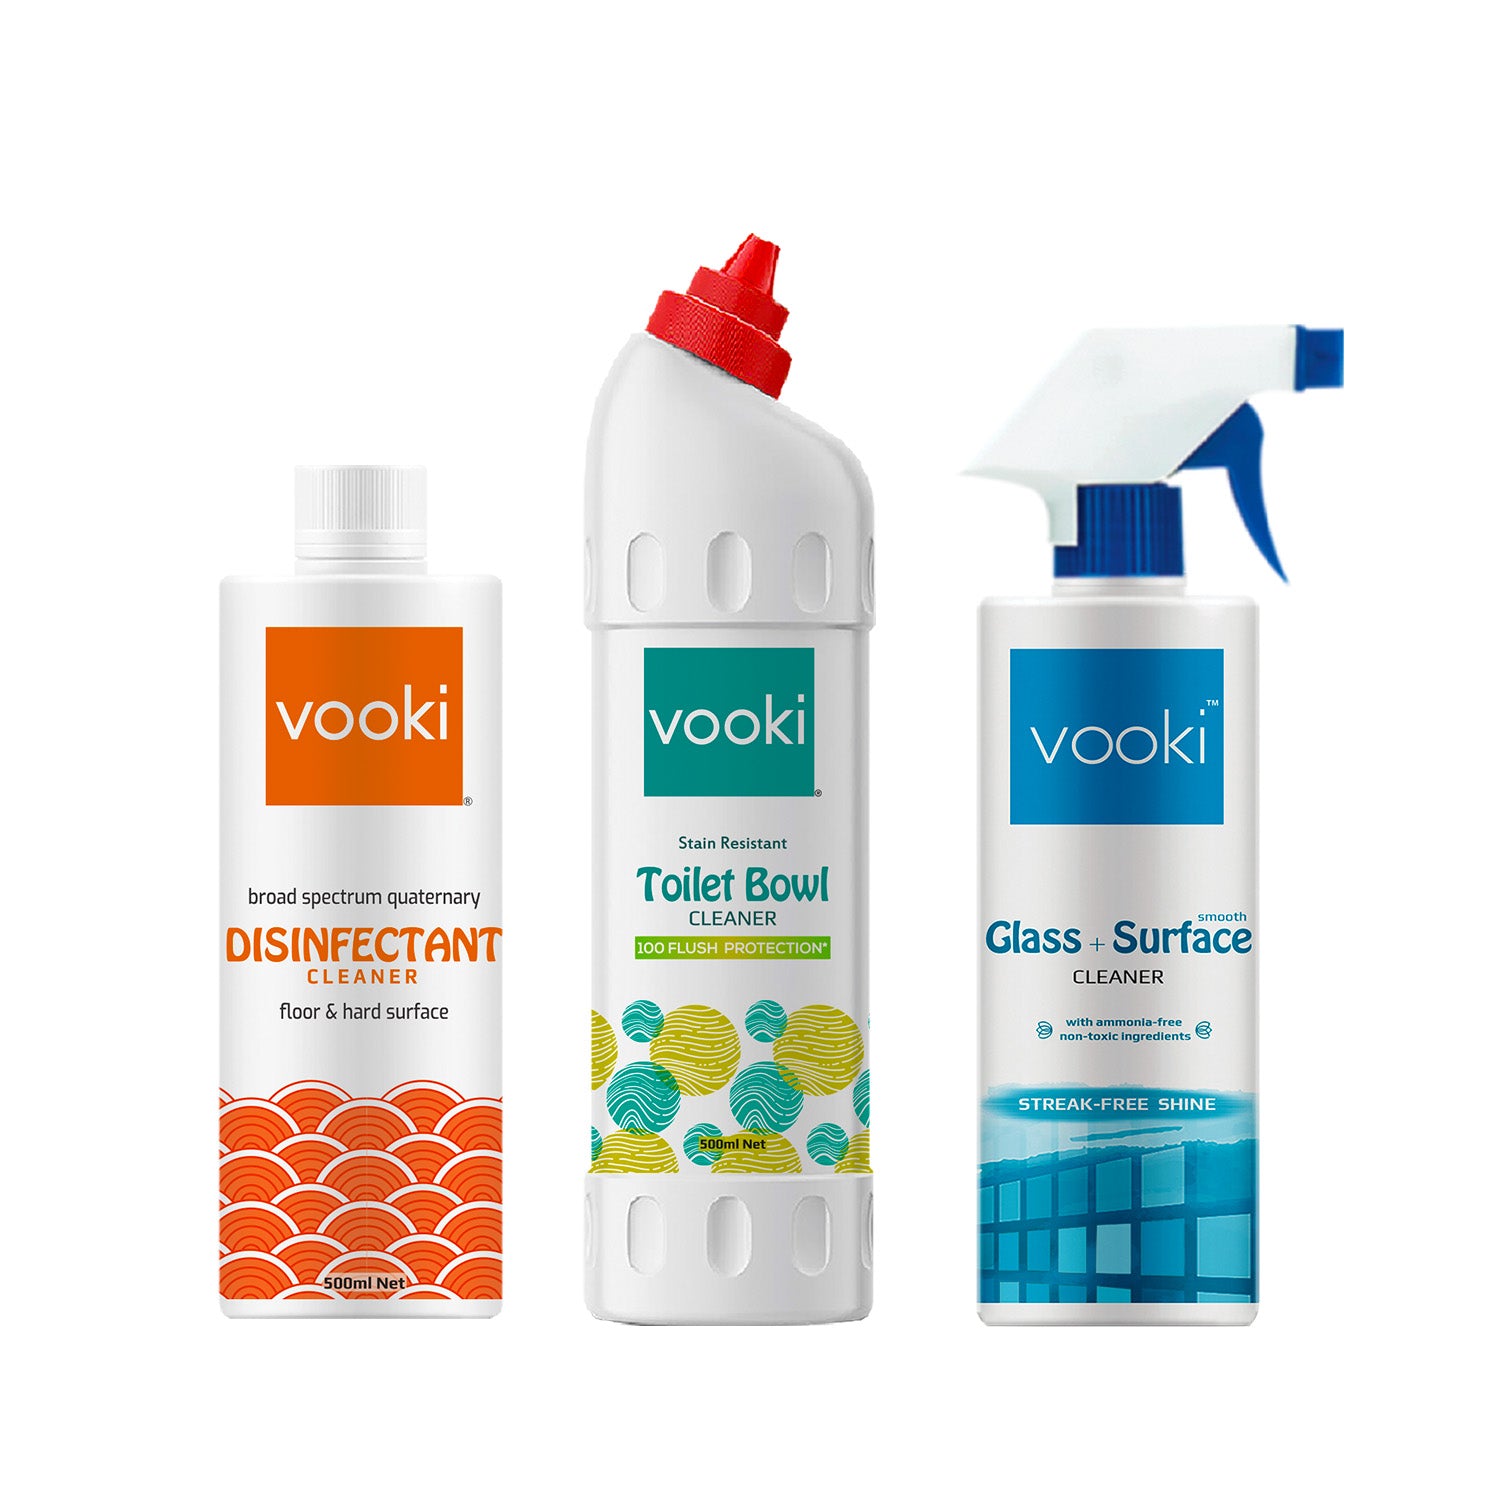 vooki cleaning products: a range of effective cleaning solutions for a spotless and fresh home.